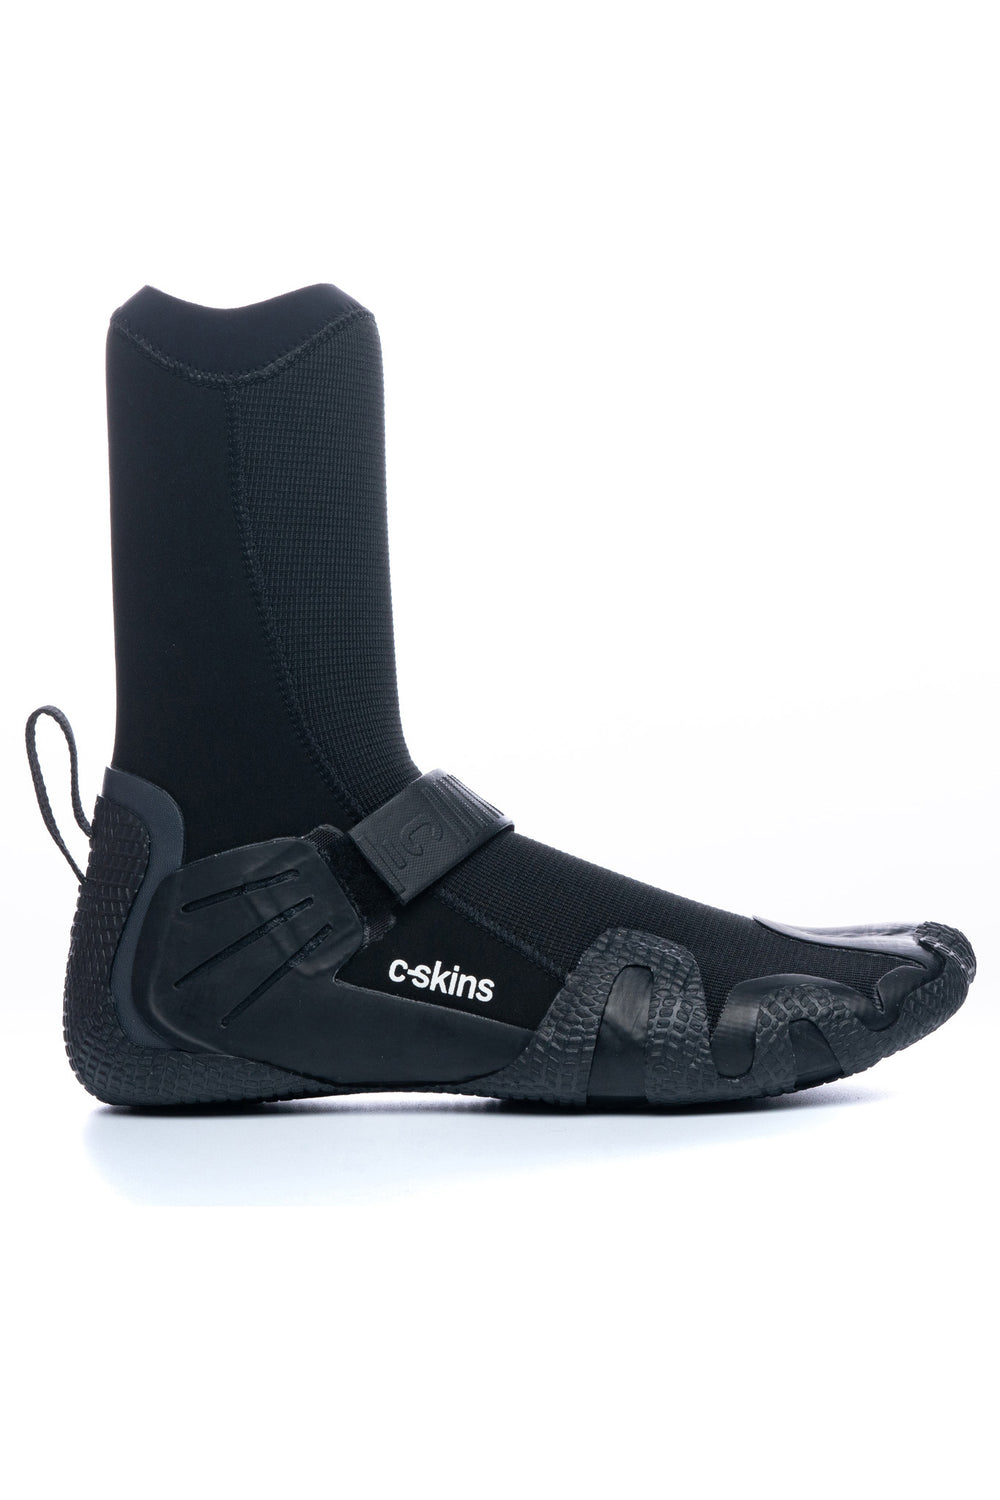 C-Skins Wired Split Toe Wetsuit Boots 5mm Adult 2023